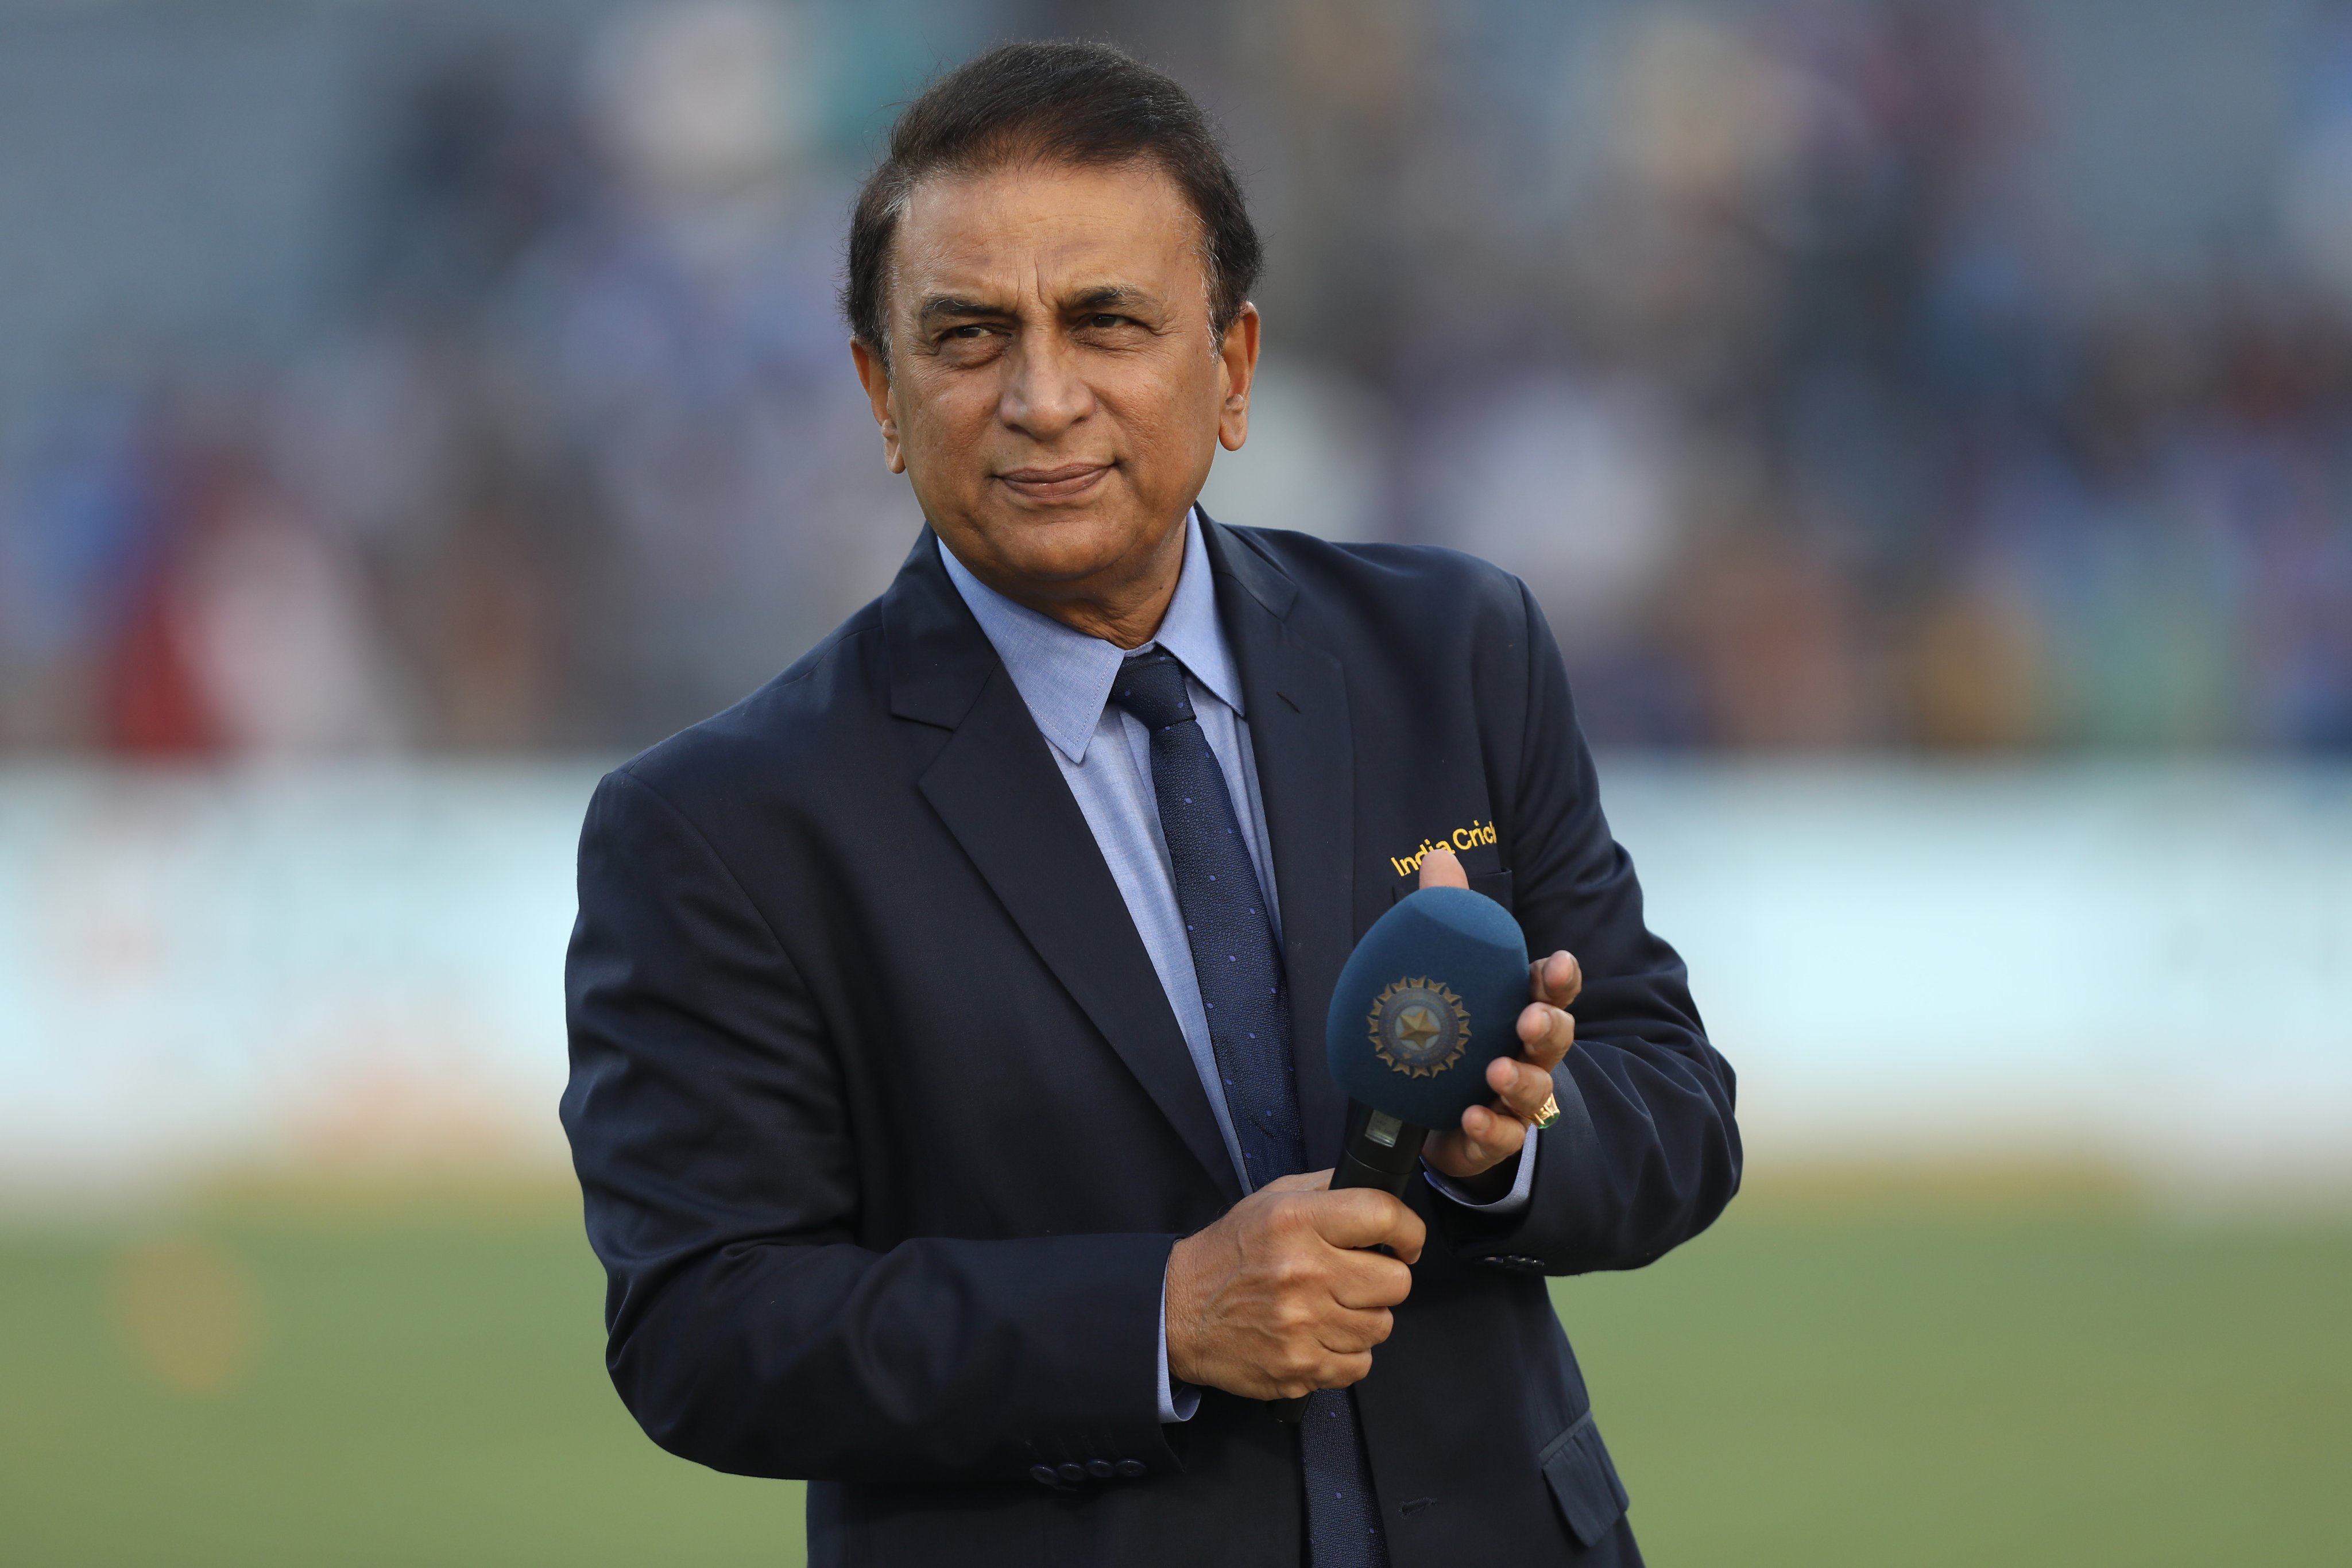 ENG vs IND | England is a ‘two-man’ team, India will win 4-0 or 3-1, quips Gavaskar